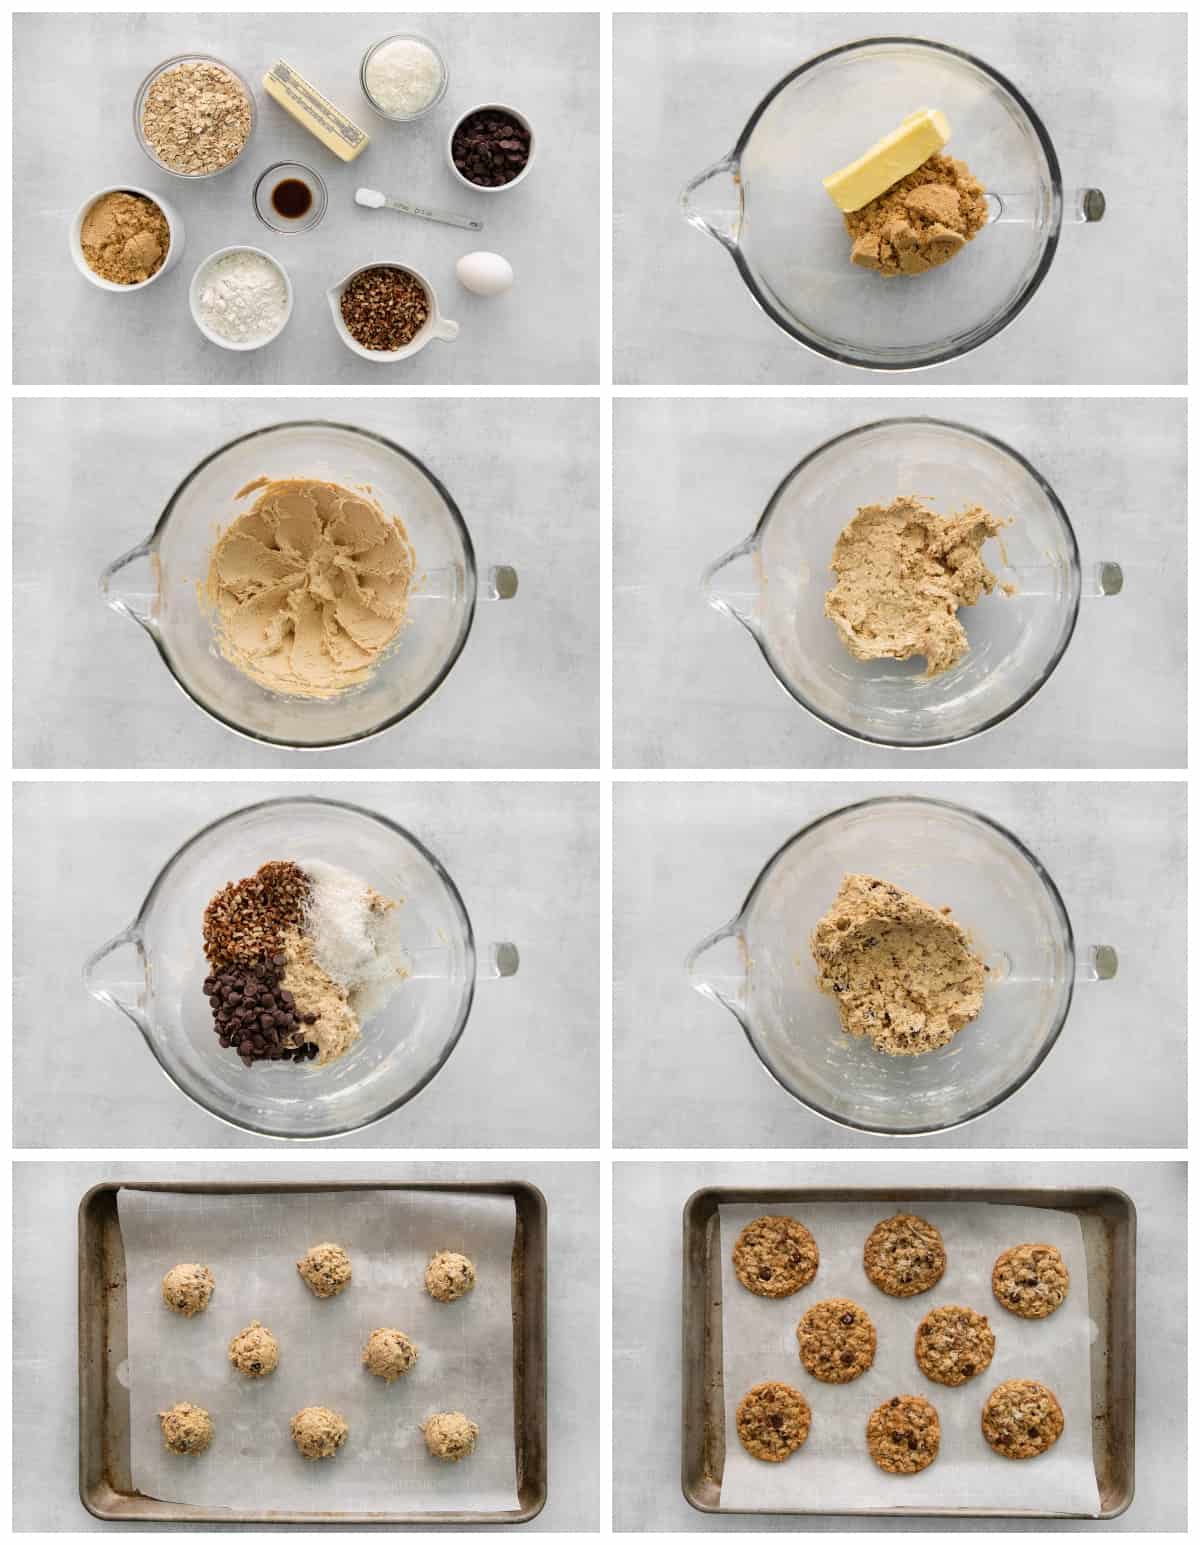 how to make cowboy cookies step by step photo instructions